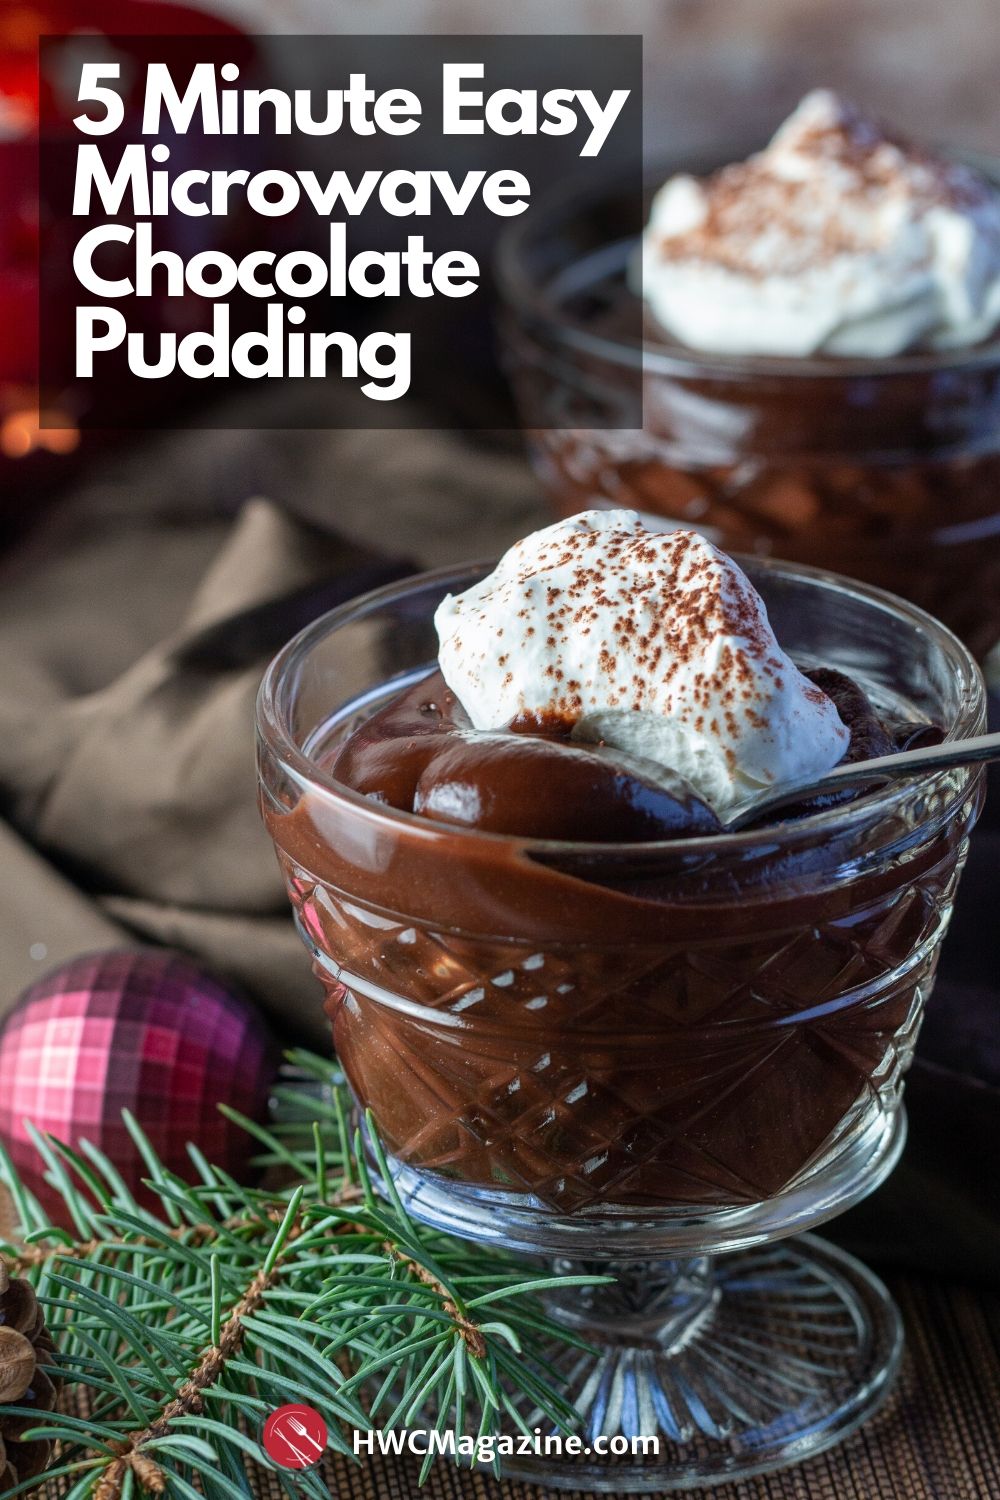 Easy Microwave Chocolate Pudding / https://www.hwcmagazine.com